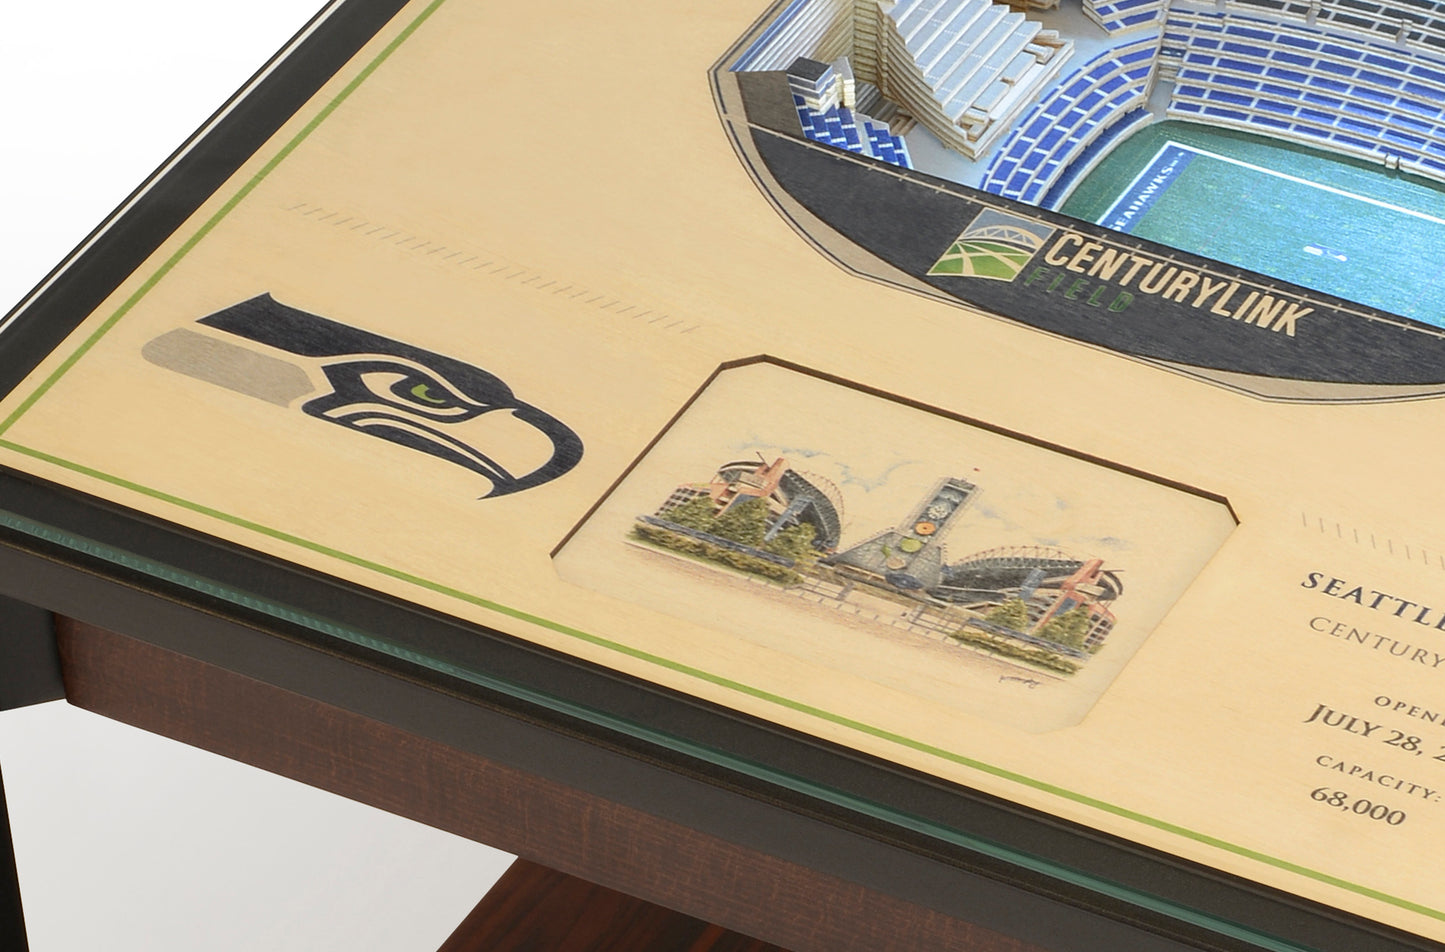 SEATTLE SEAHAWKS 25 LAYER 3D STADIUM LIGHTED END TABLE